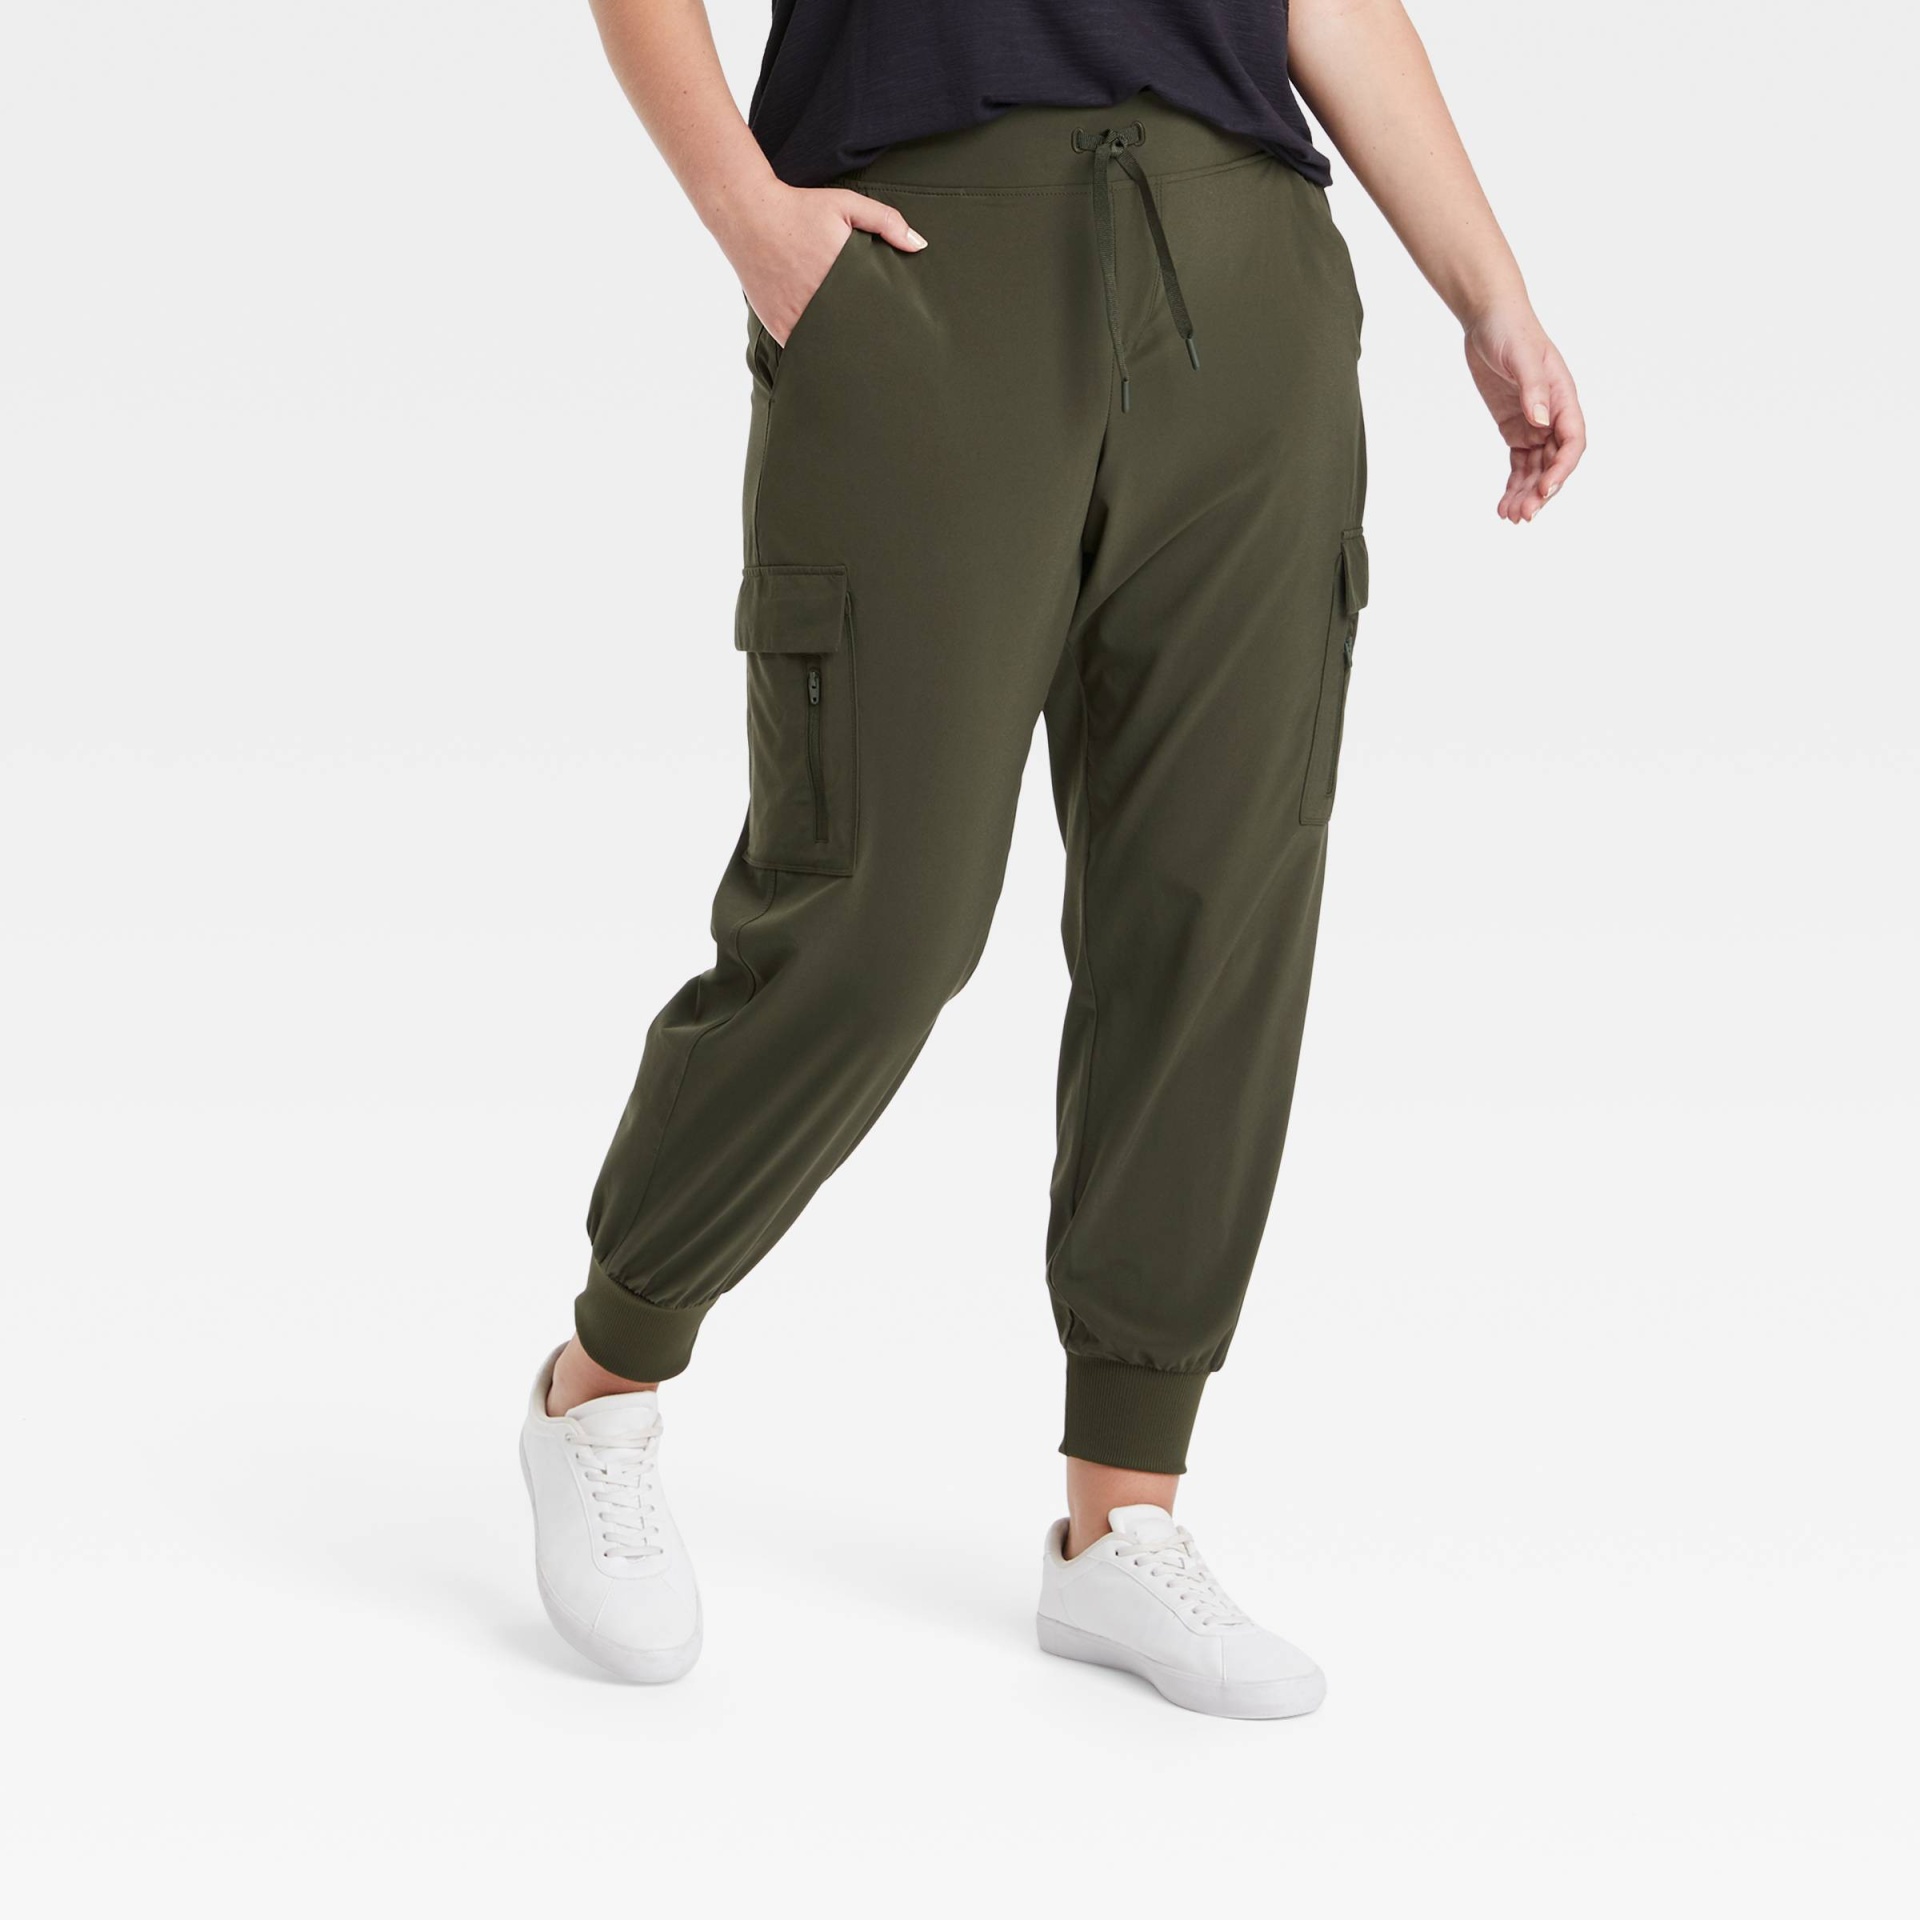 Women's Stretch Woven Wide Leg Cargo Pants - All in Motion Olive L